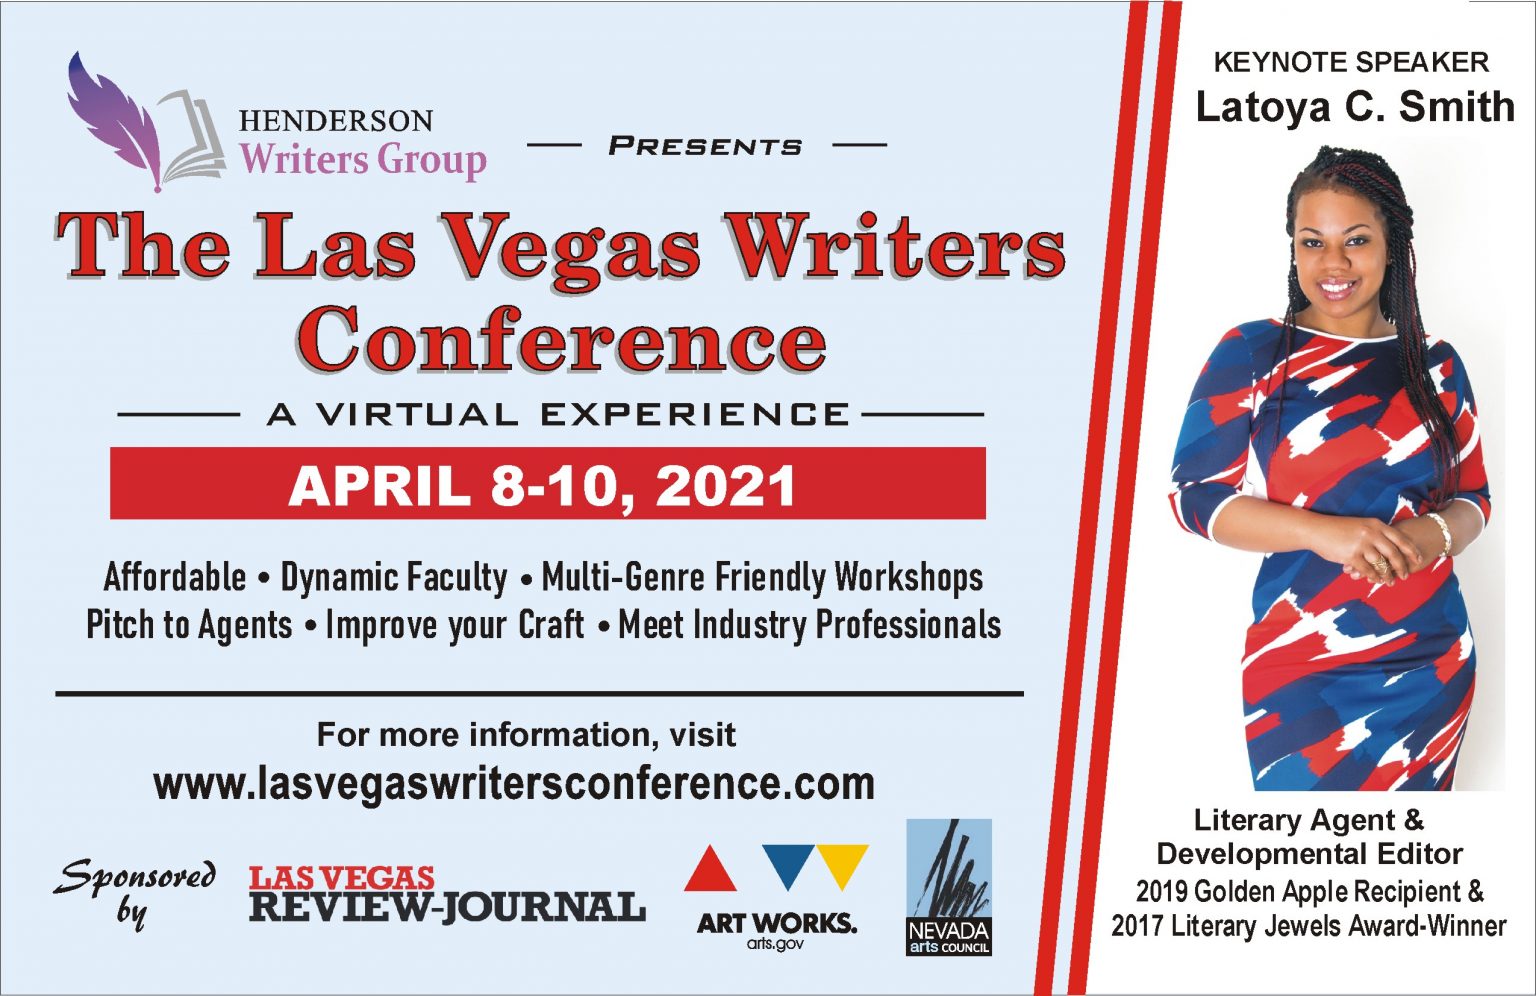 The Las Vegas Writers Conference